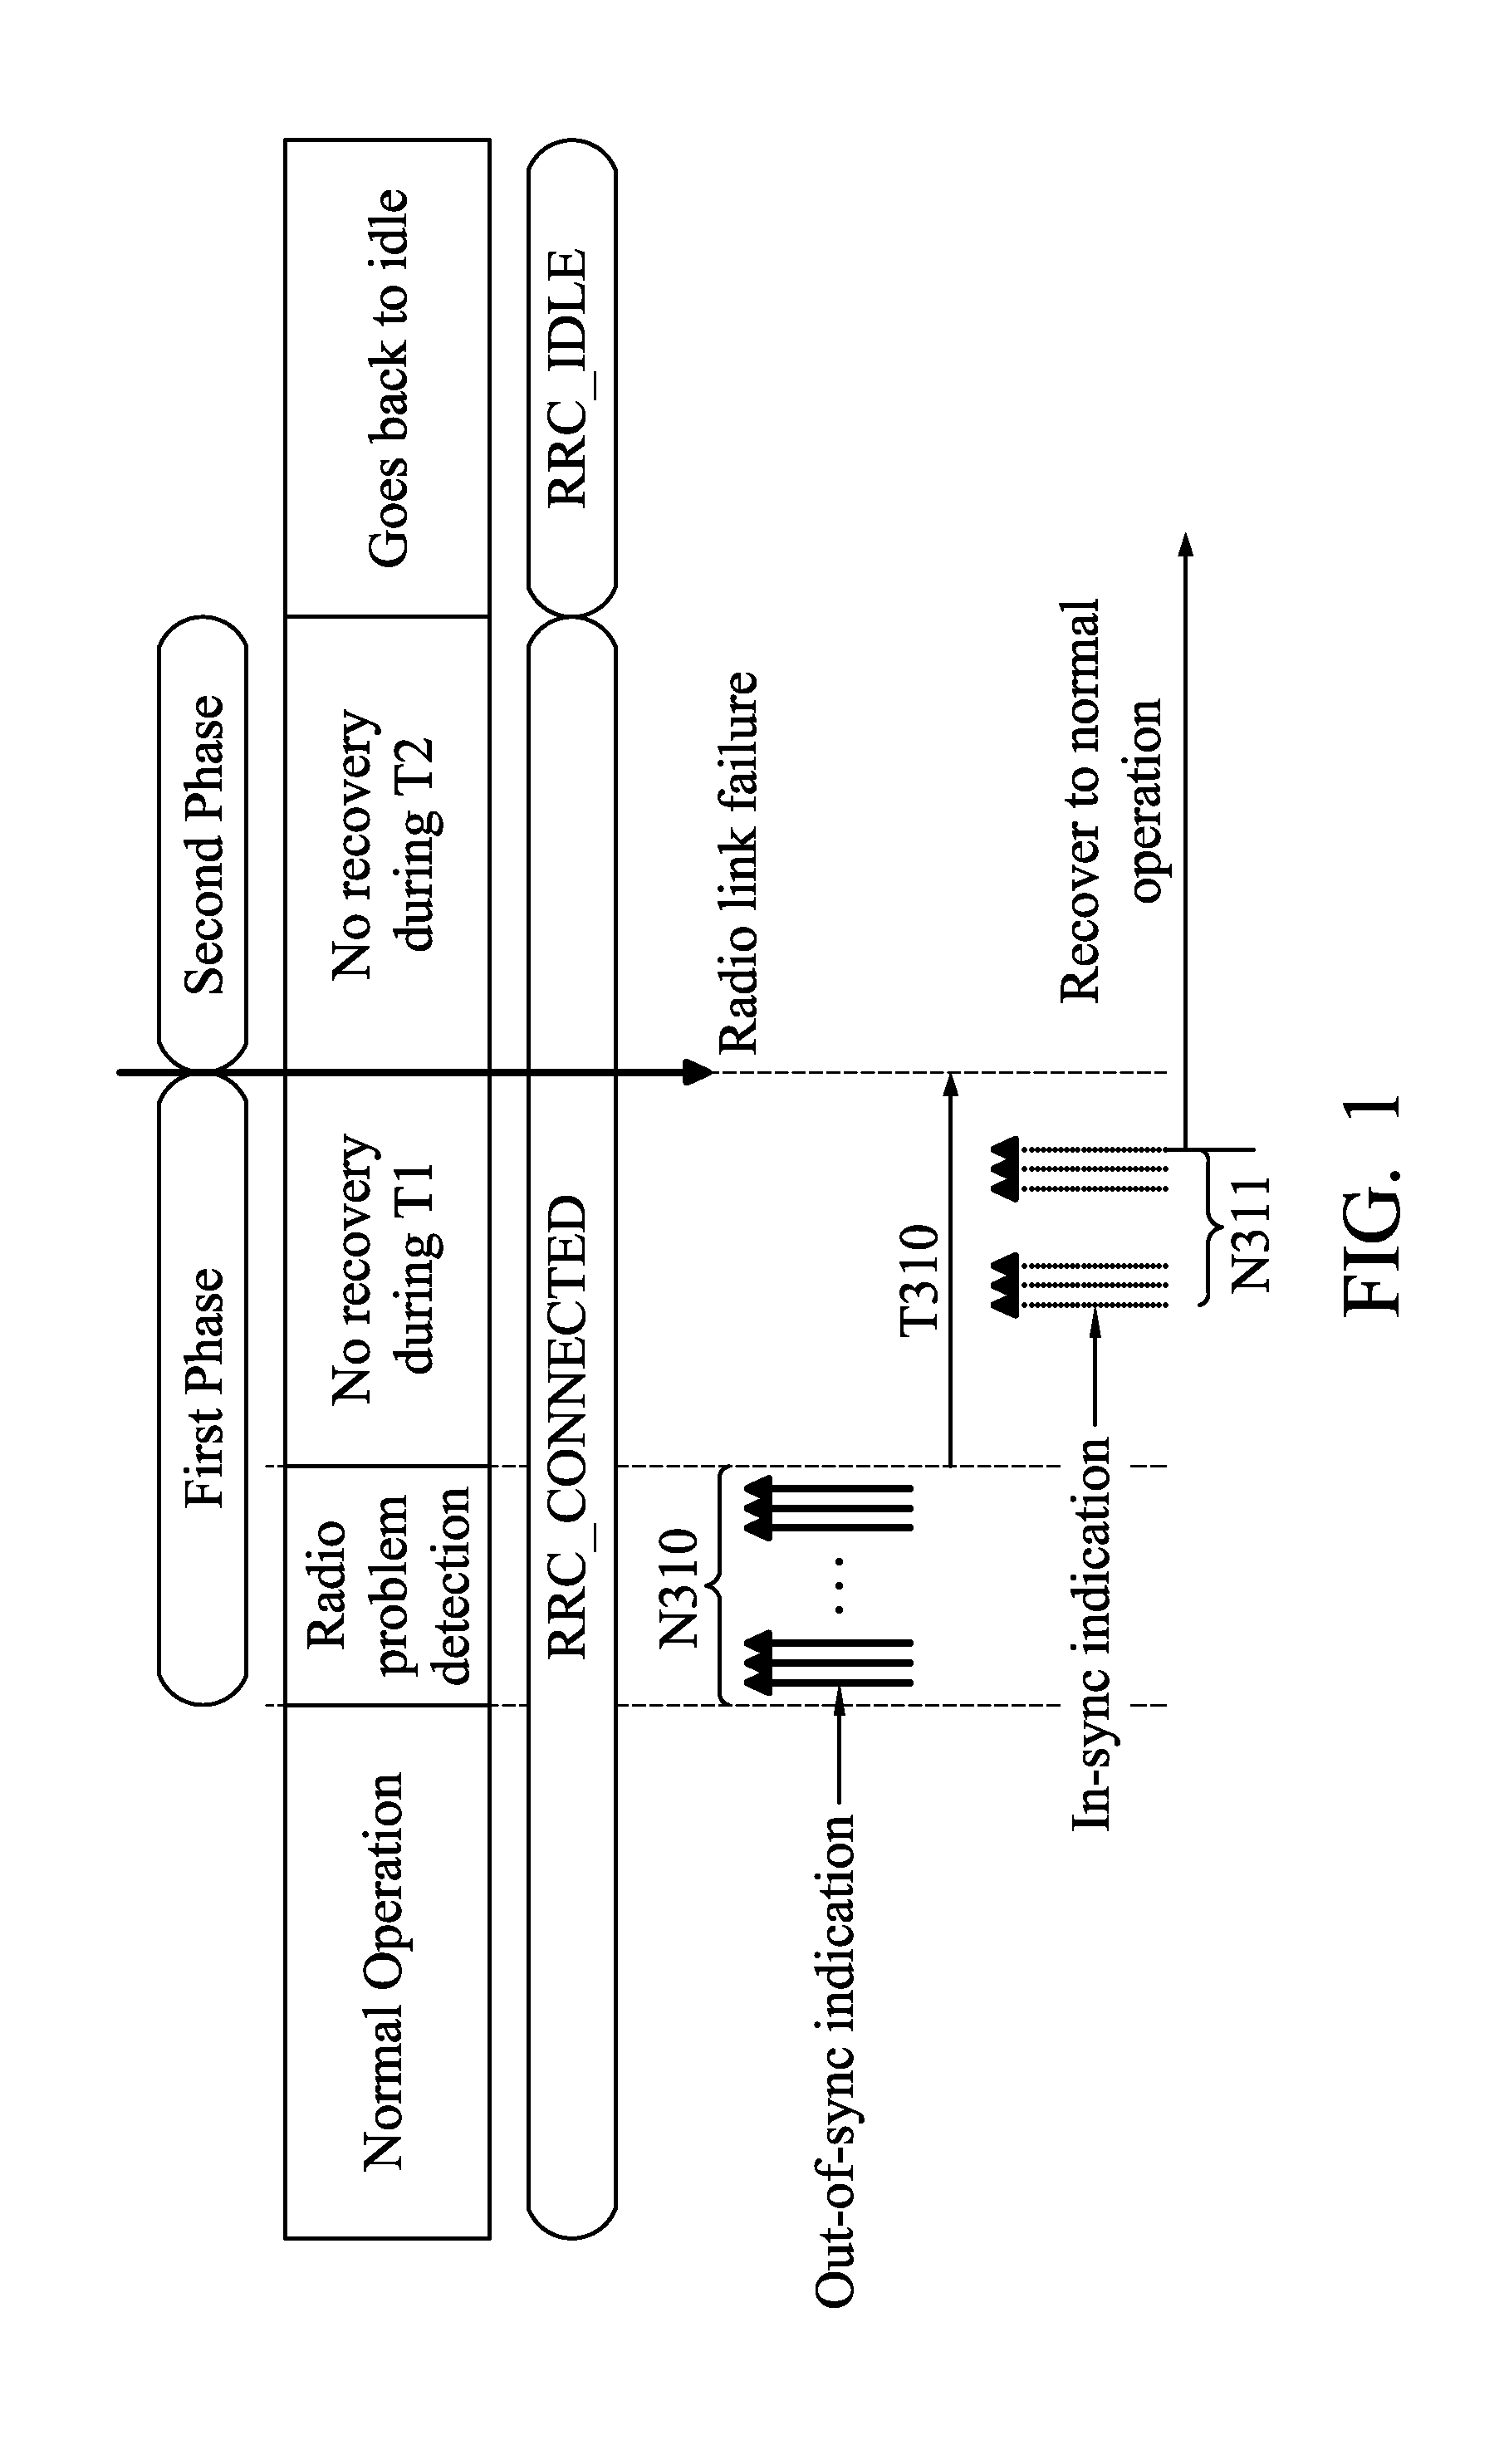 Systems and methods for reporting radio link failure